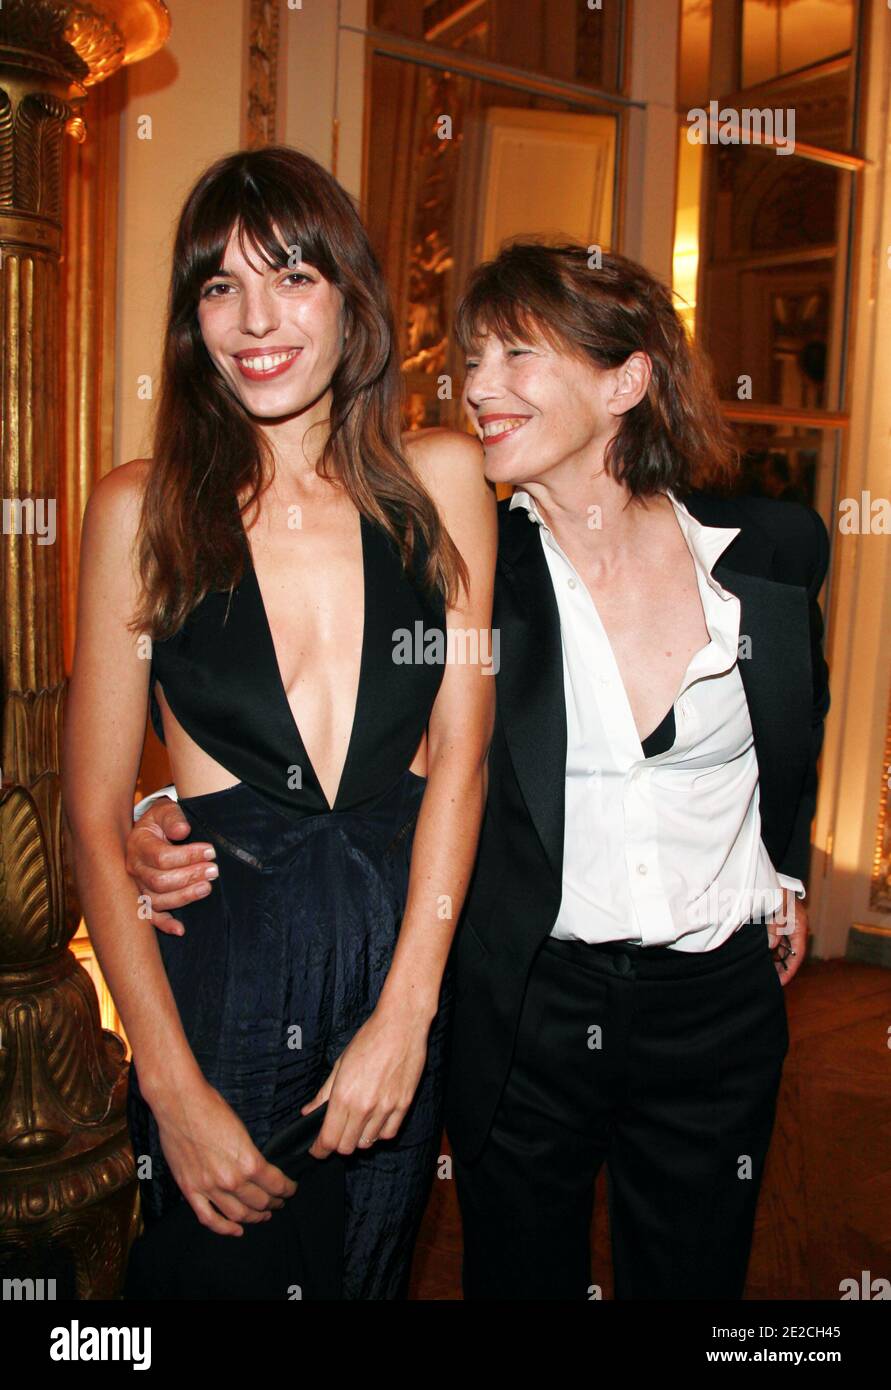 Jane Birkin and her daughter Lou Doillon attending the premiere of